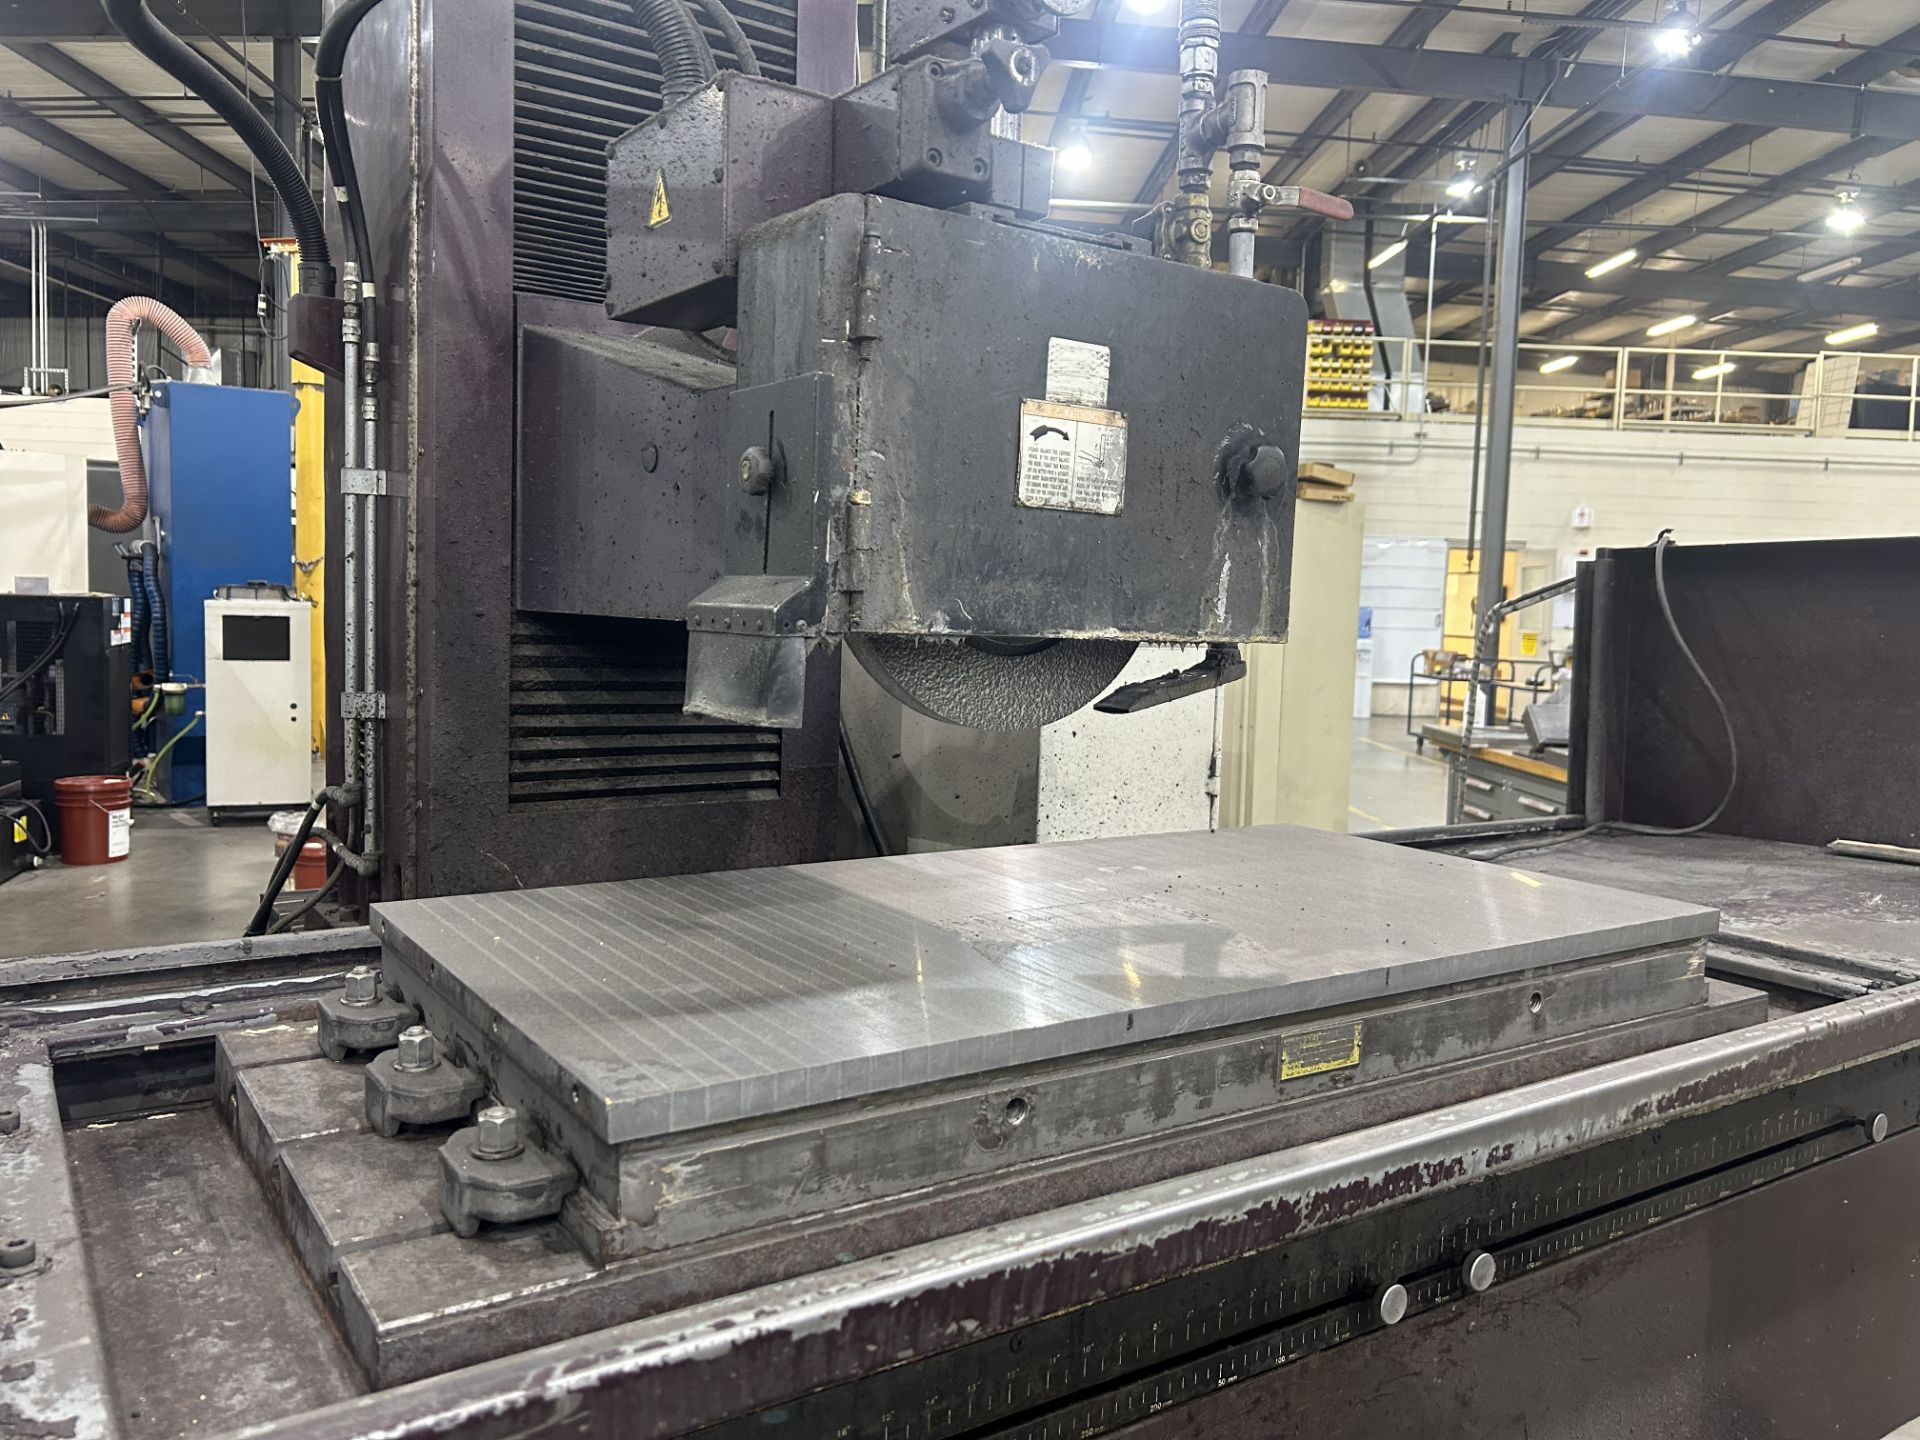 Chevalier FSG-2040ADII Surface Grinder, 20" x 40" Magnetic Chuck - Image 2 of 3